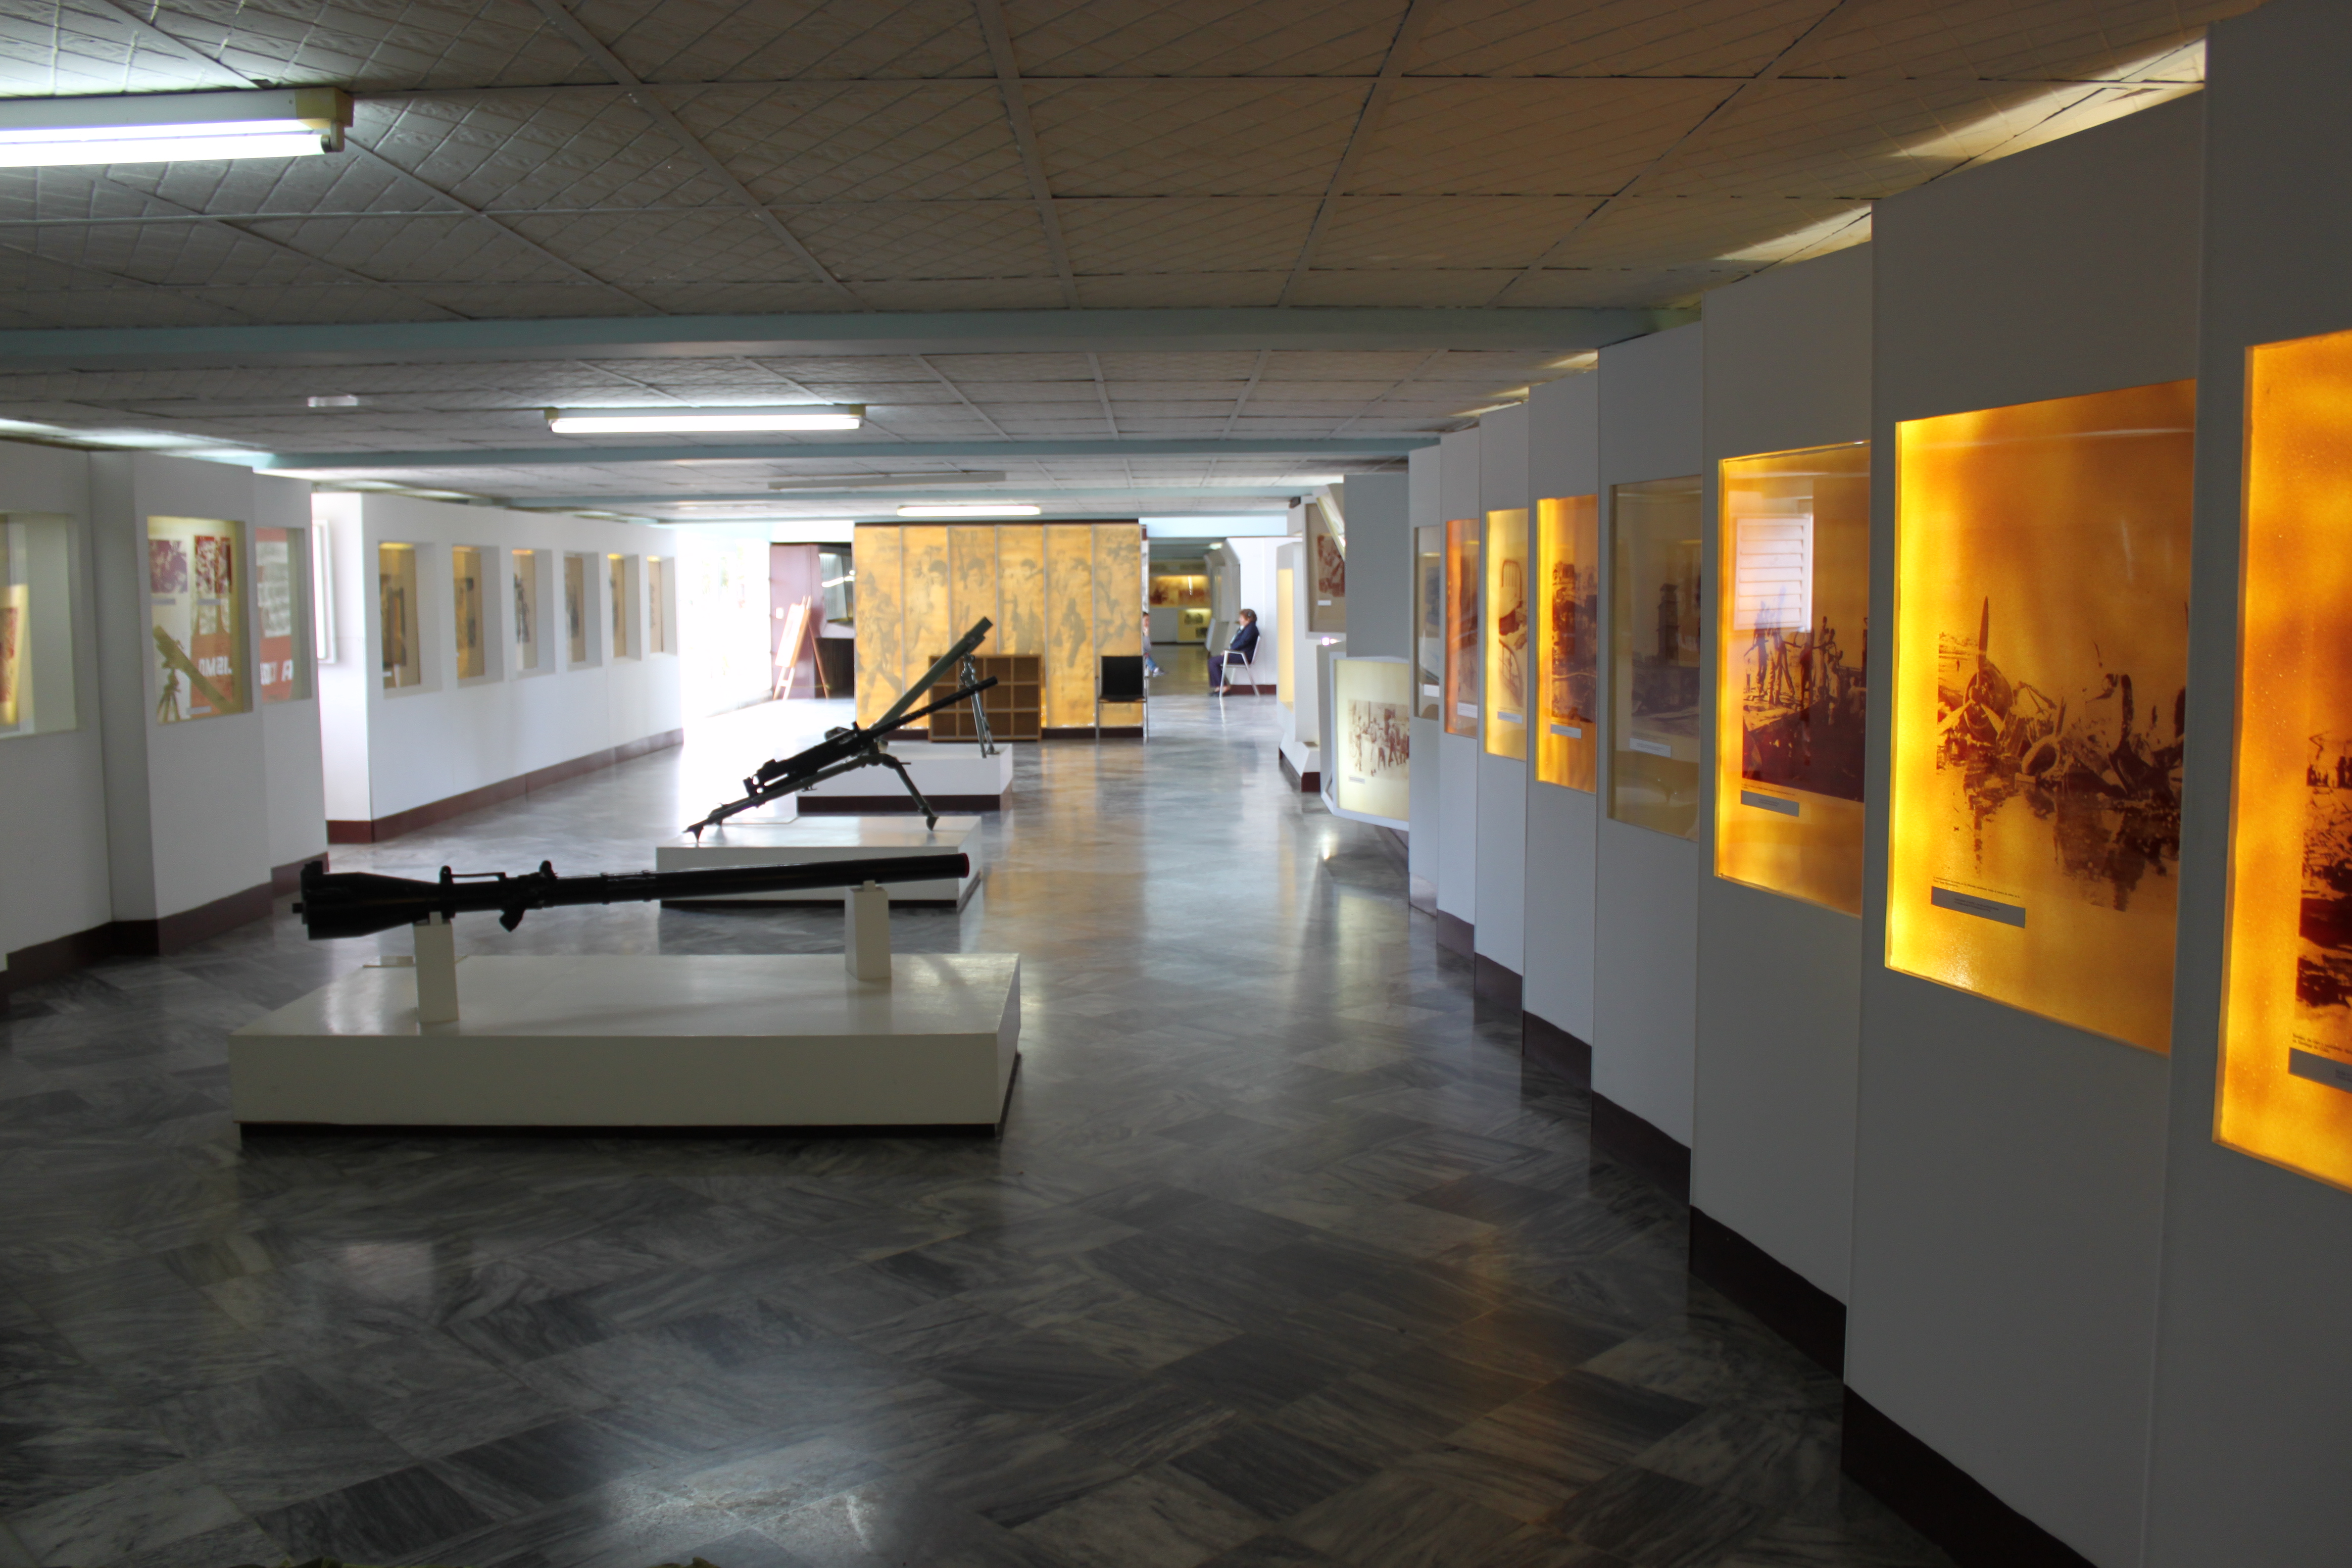 A view down the hall of the Museo of Playa Giróm